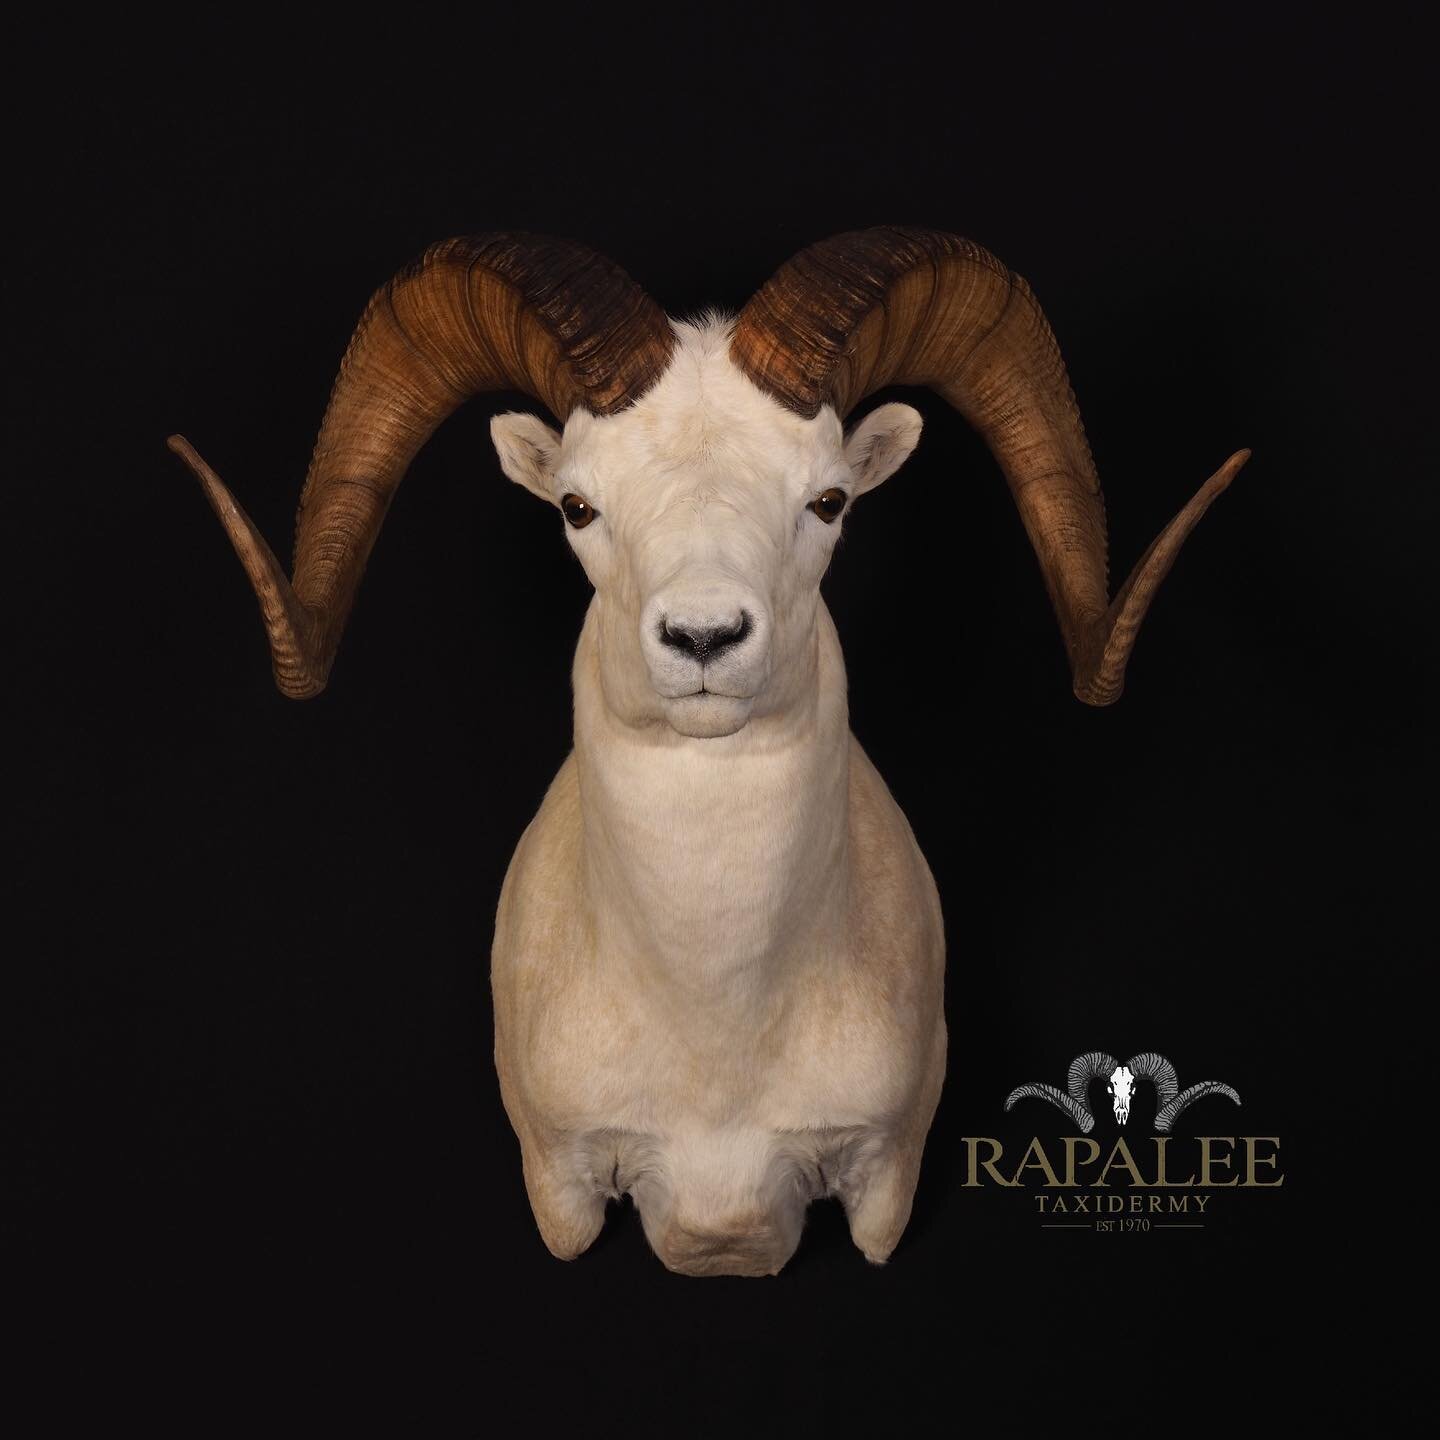 Todays featured mount is this remarkable Dall sheep. If you know about sheep and sheep hunting you know how nice this ram is! Fridays Fun Fact is.. The species is named after American naturalist William Healy Dall. Others named after him include seve